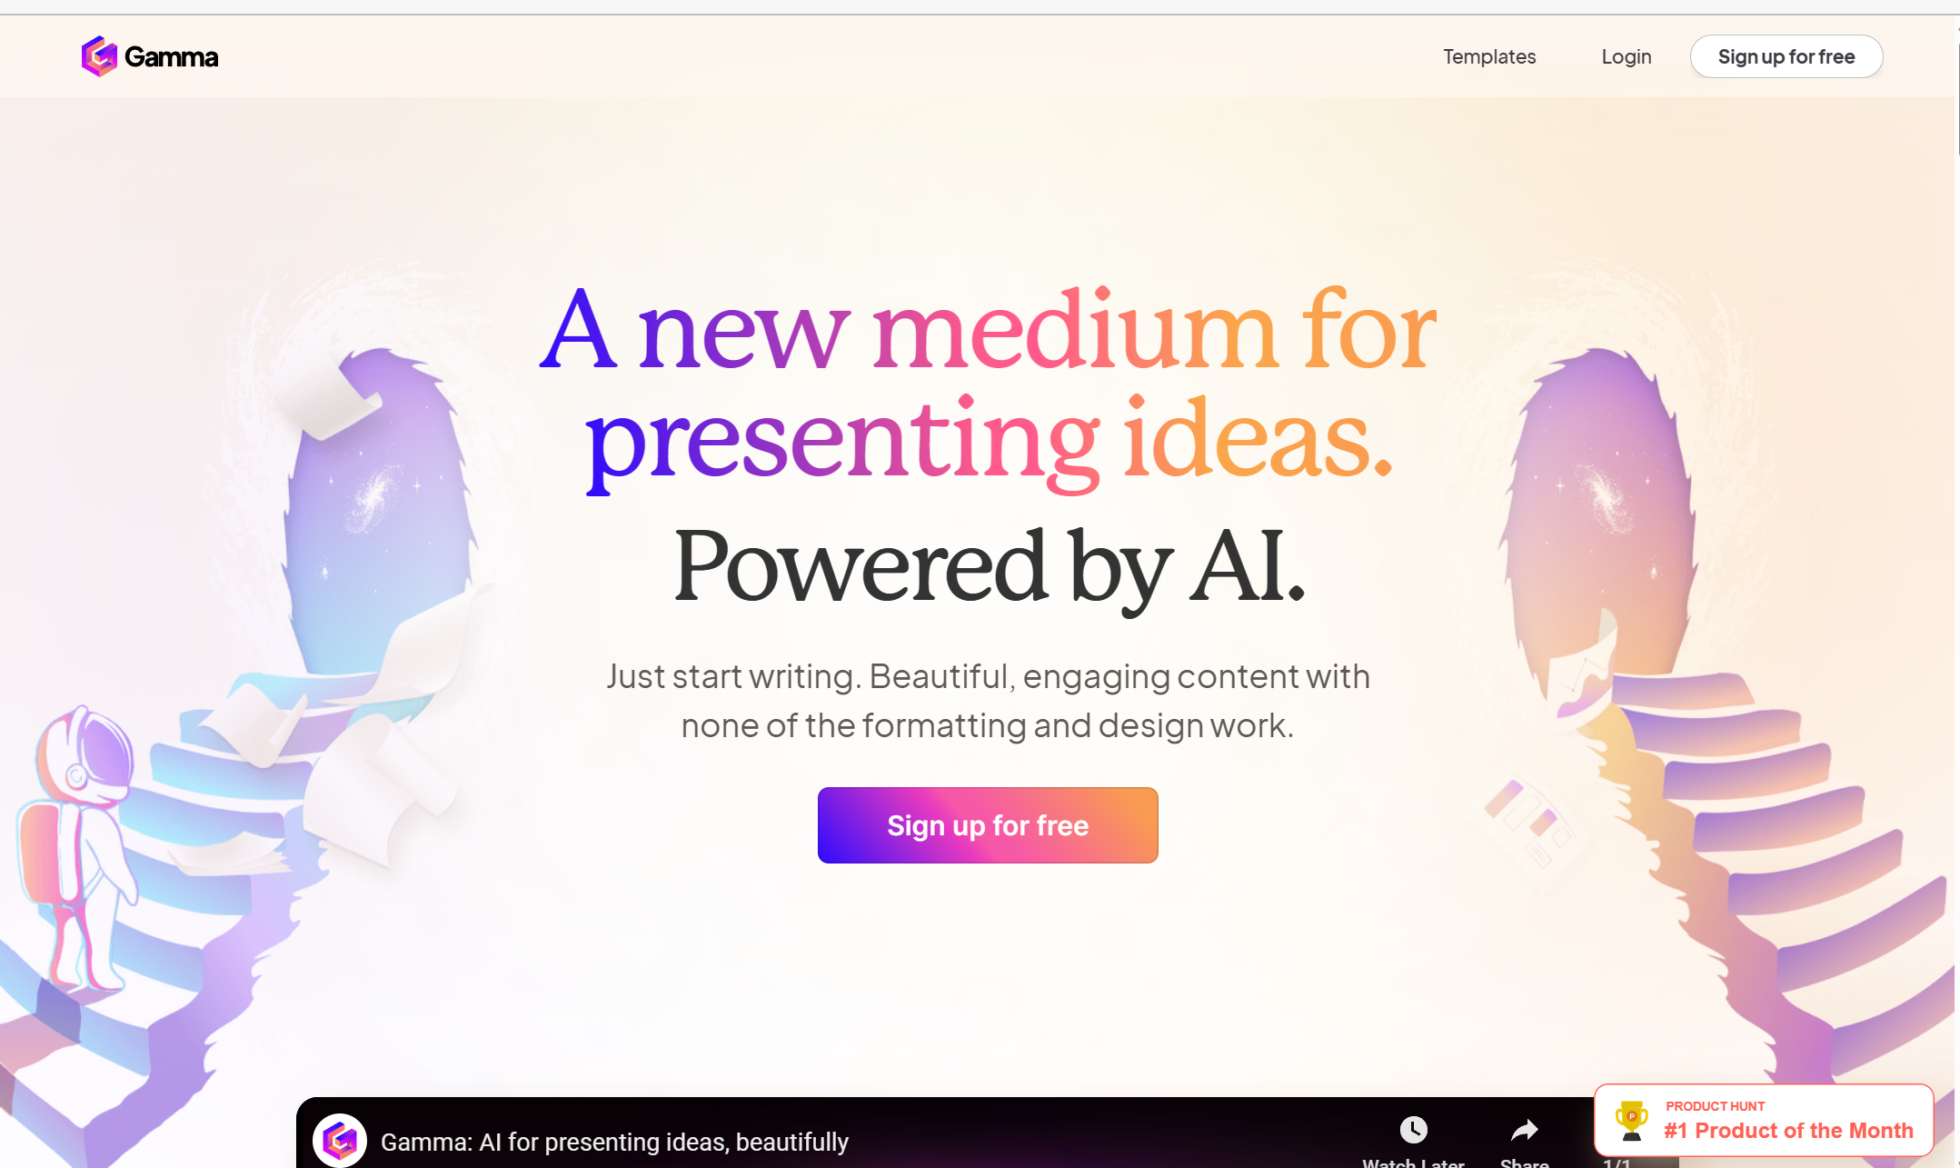 Gamma is a powerful presentation tool powered by AI